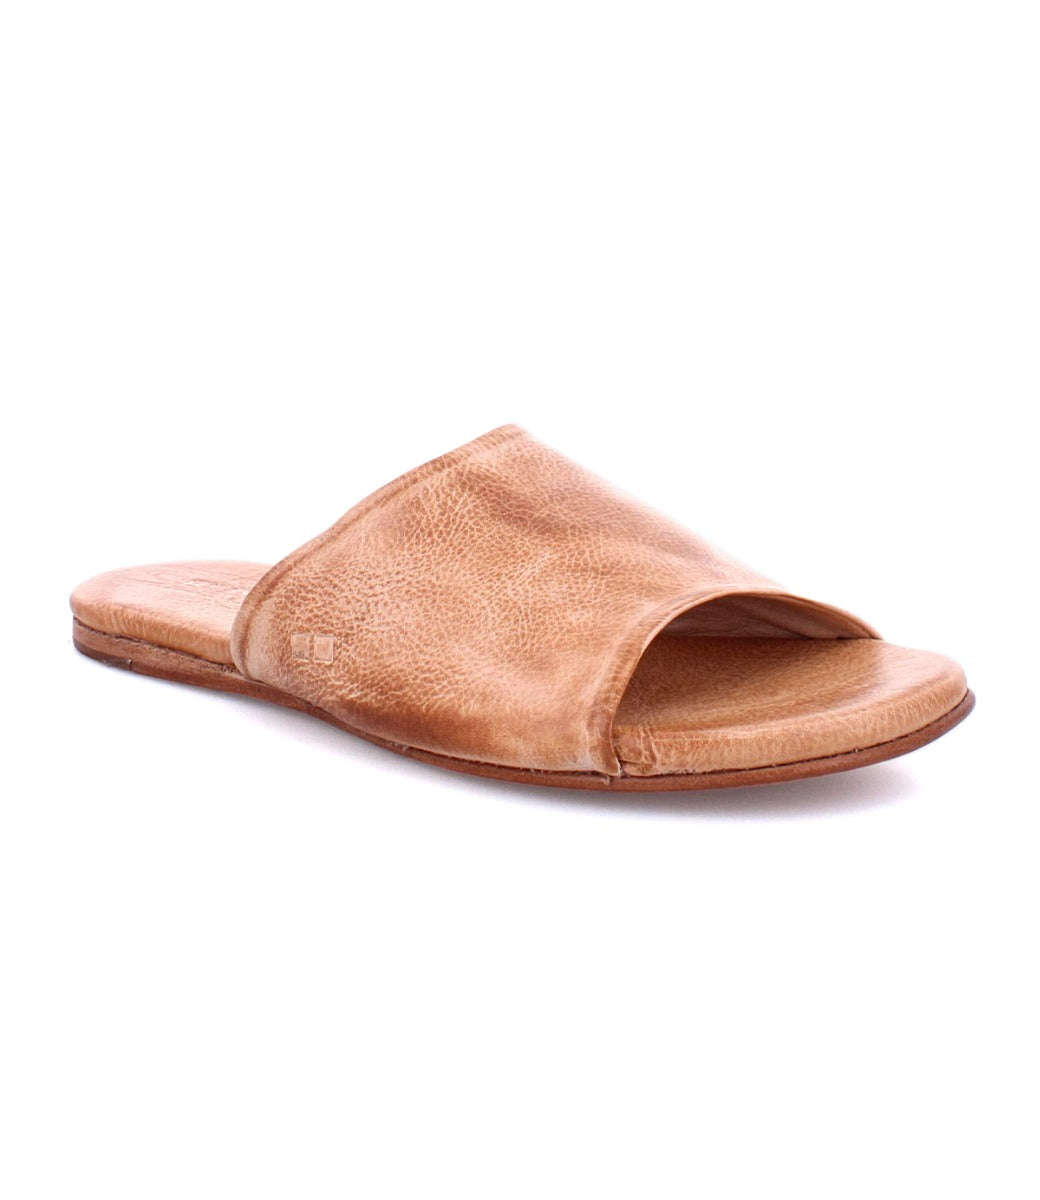 The Gia women's tan pure leather slide on sandals by Bed Stu.